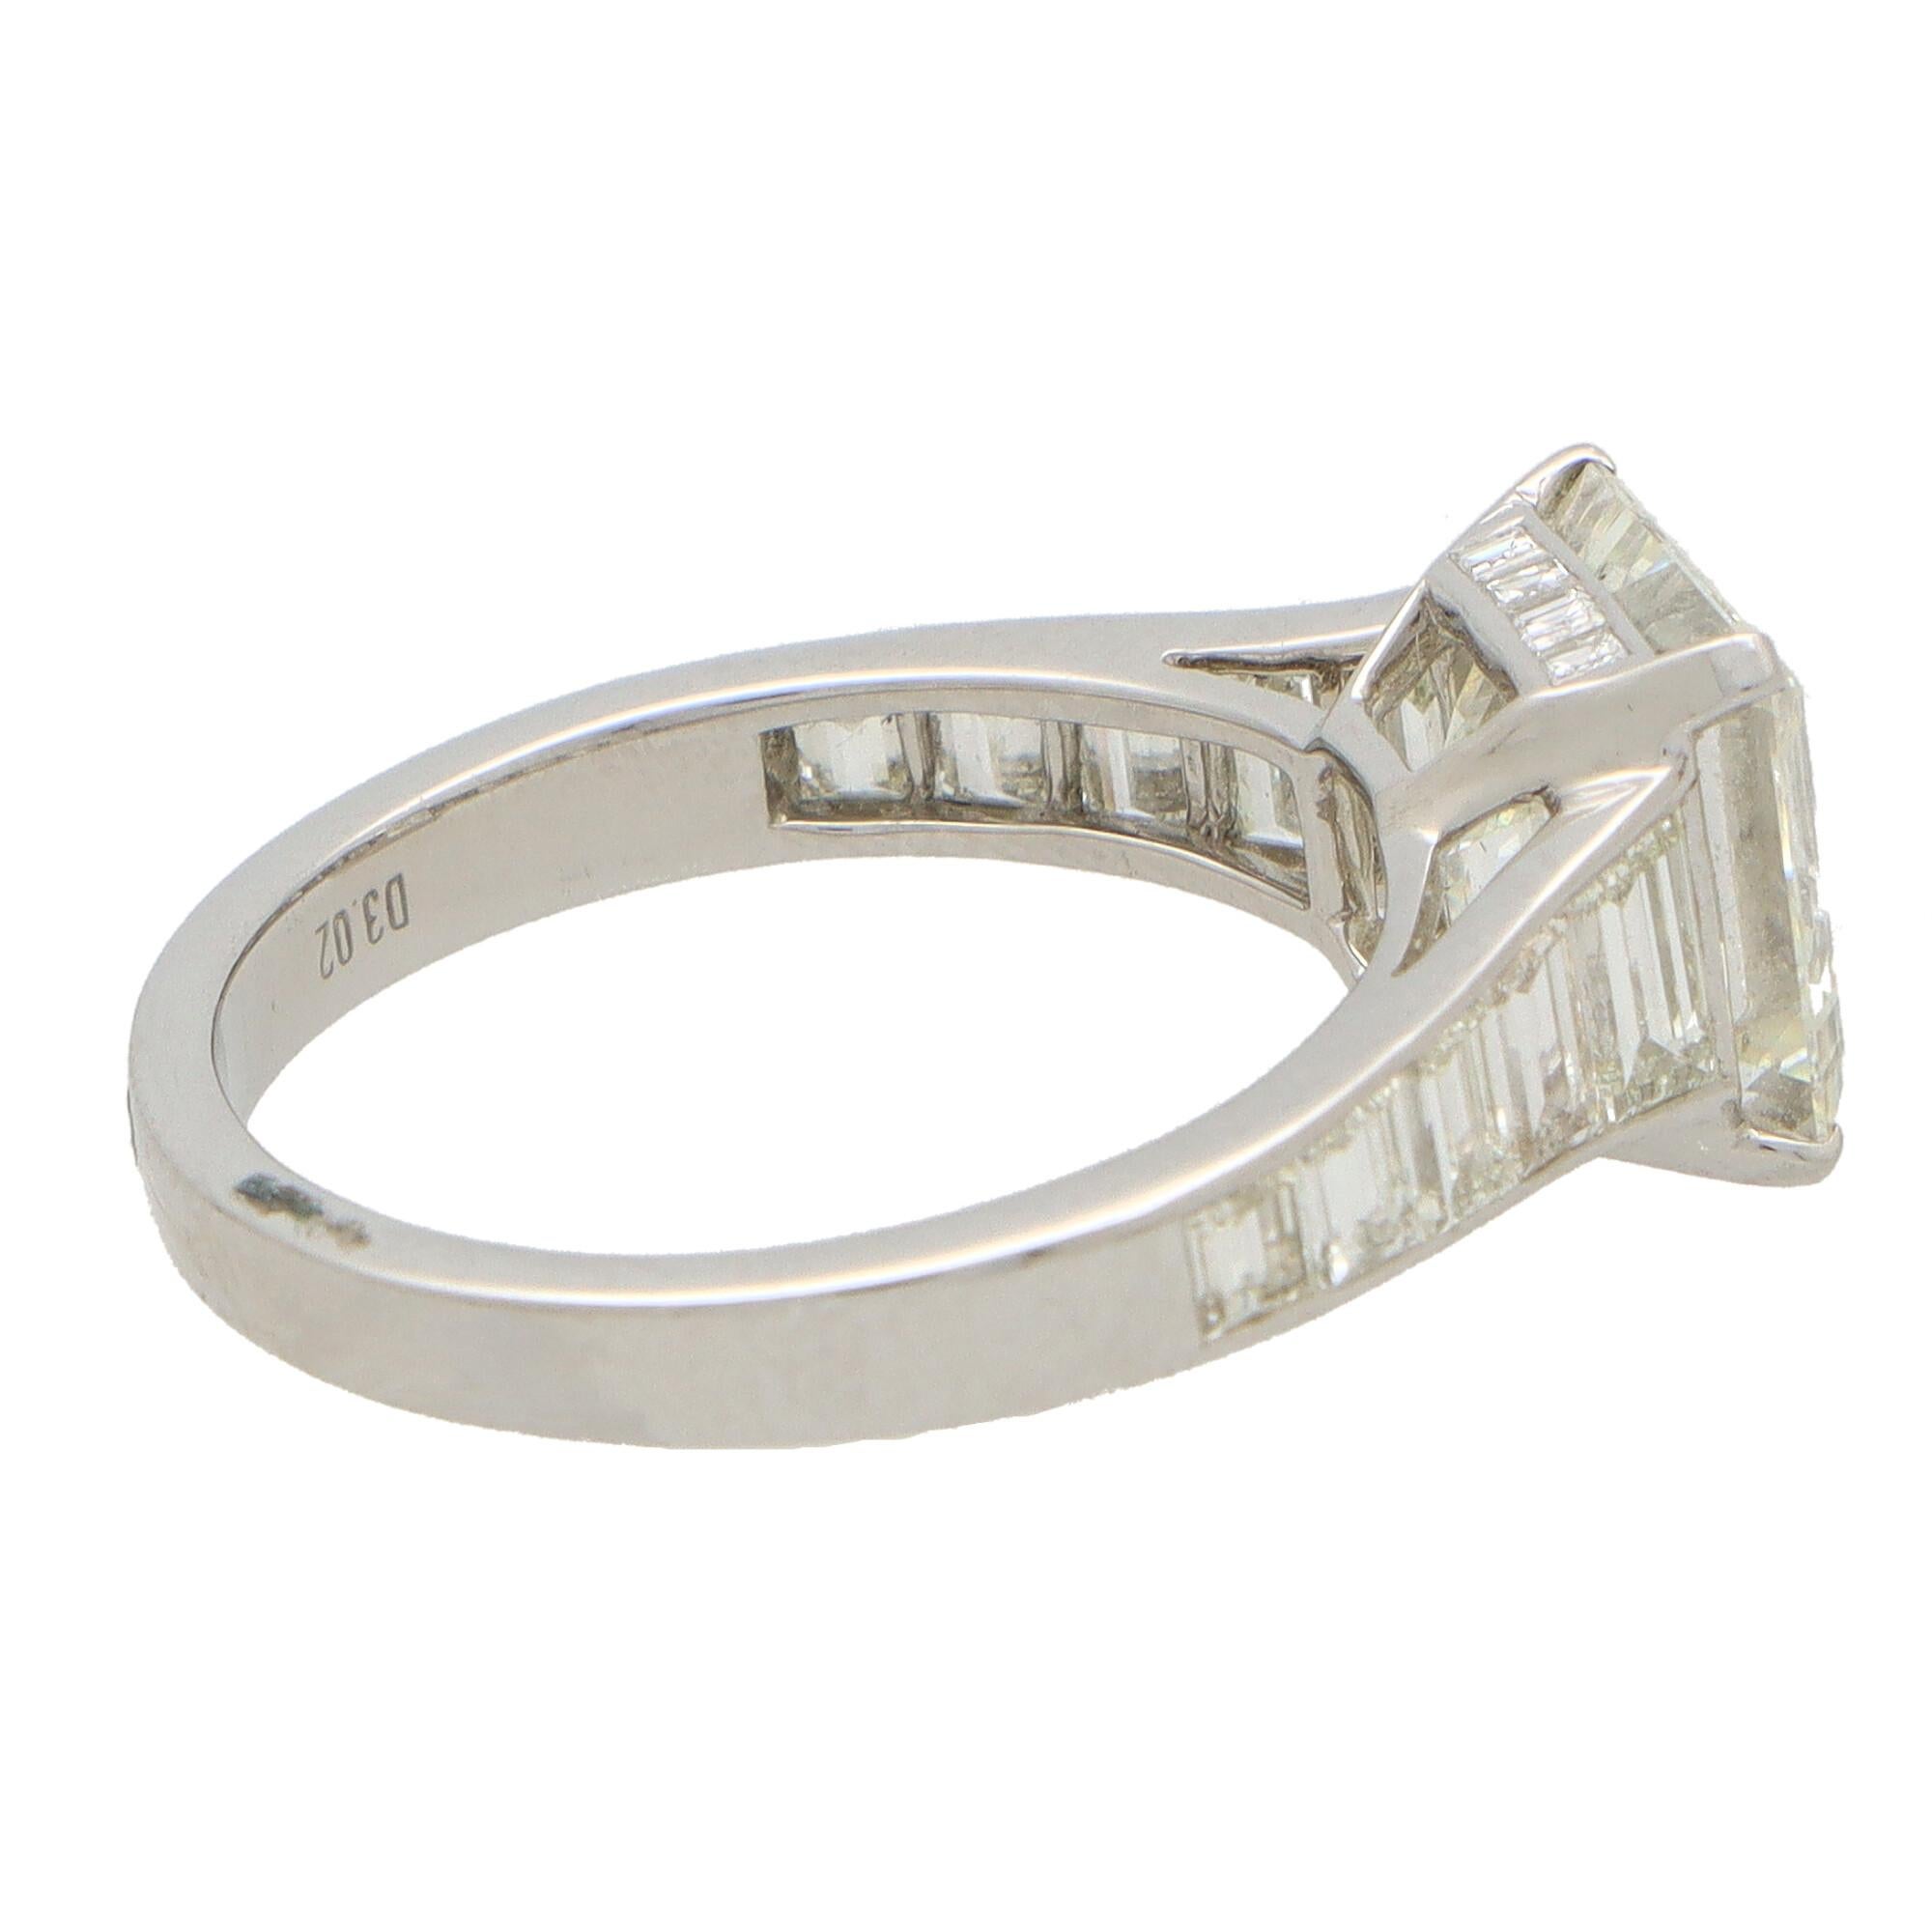 Art Deco 3.02ct Square Emerald Cut Diamond Ring with Baguette Shoulders in Platinum For Sale